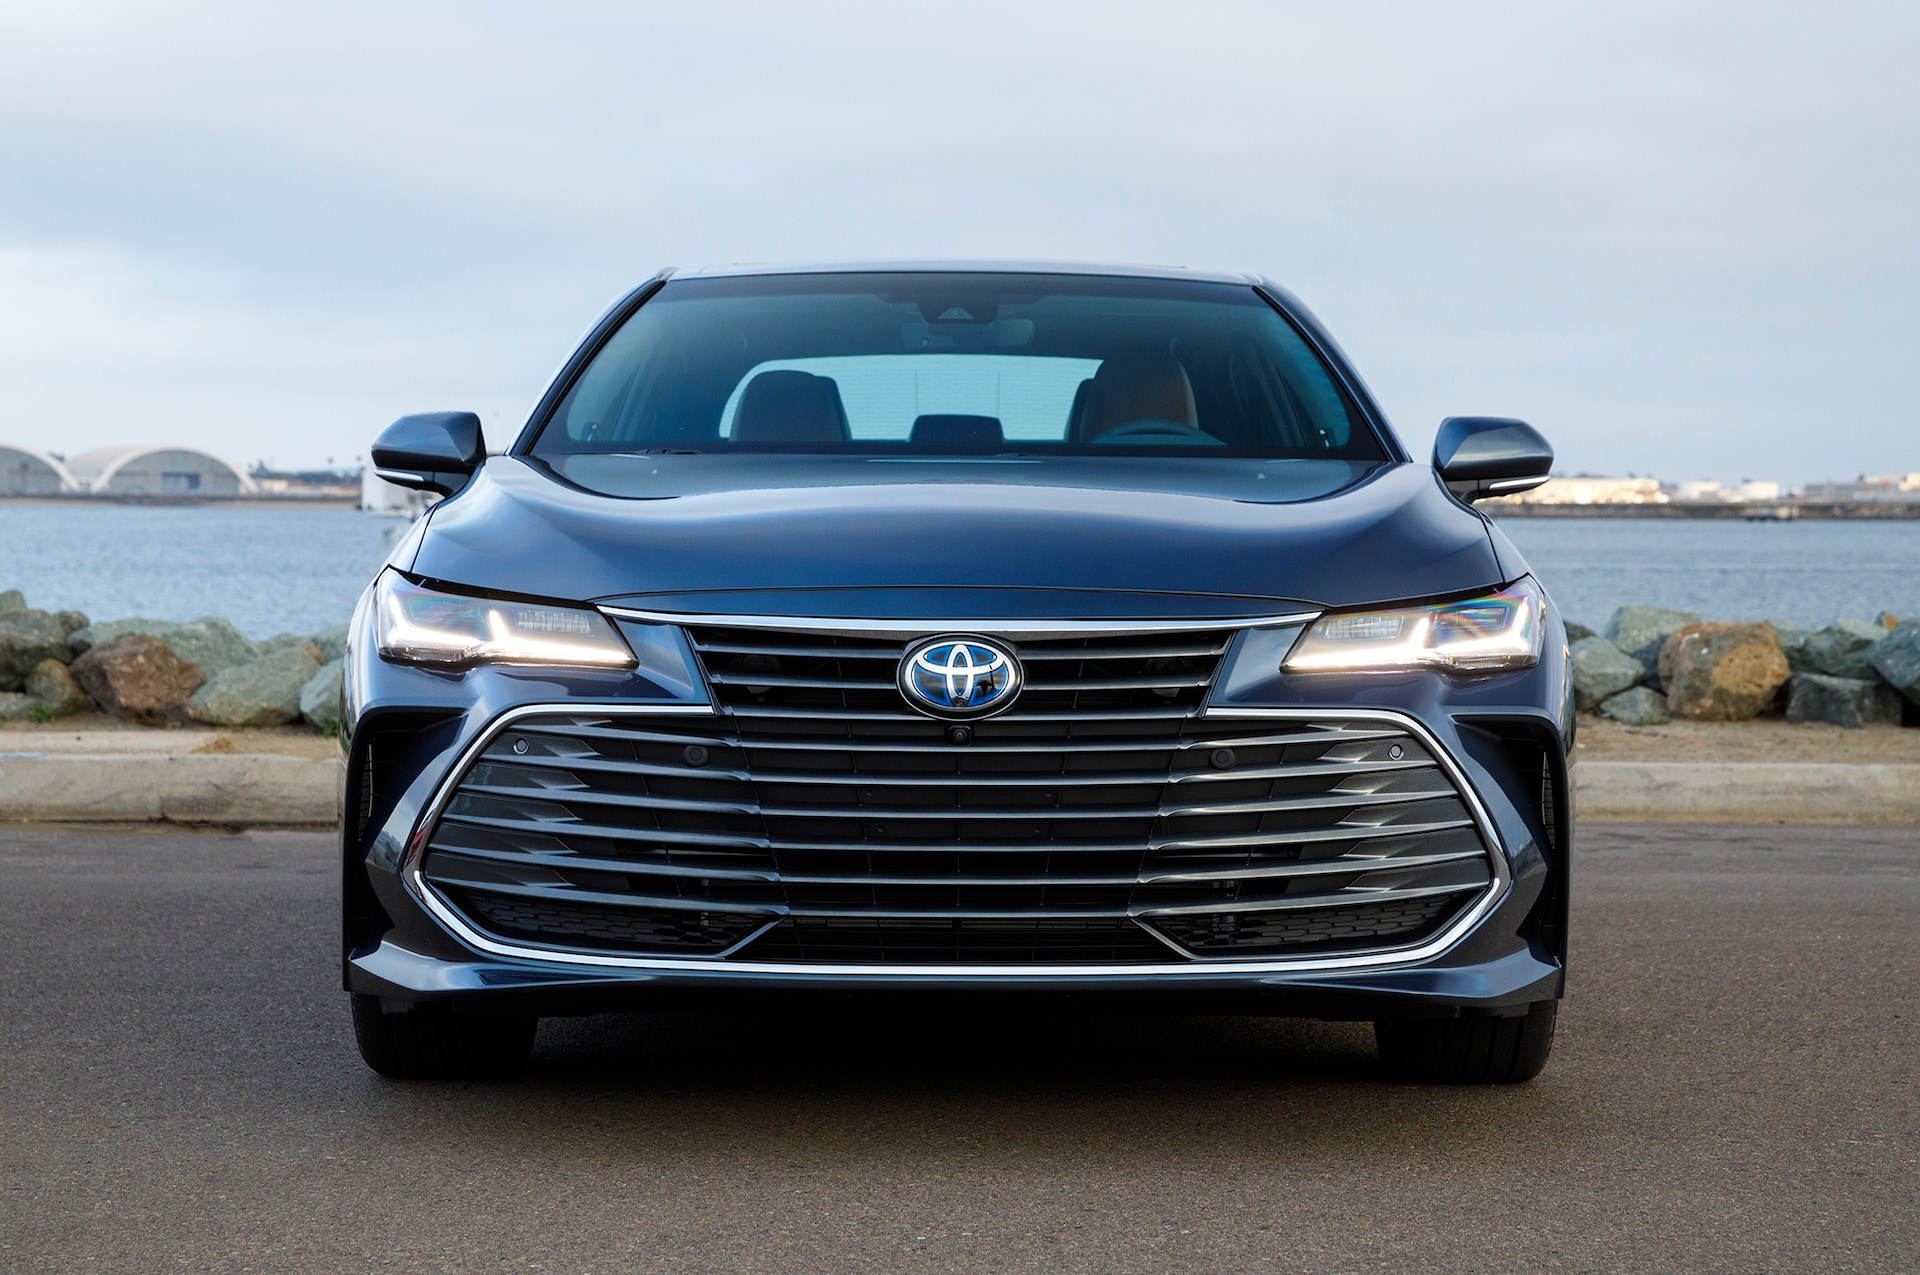 2019 Toyota Avalon Interior Review: Not a Camry-Plus